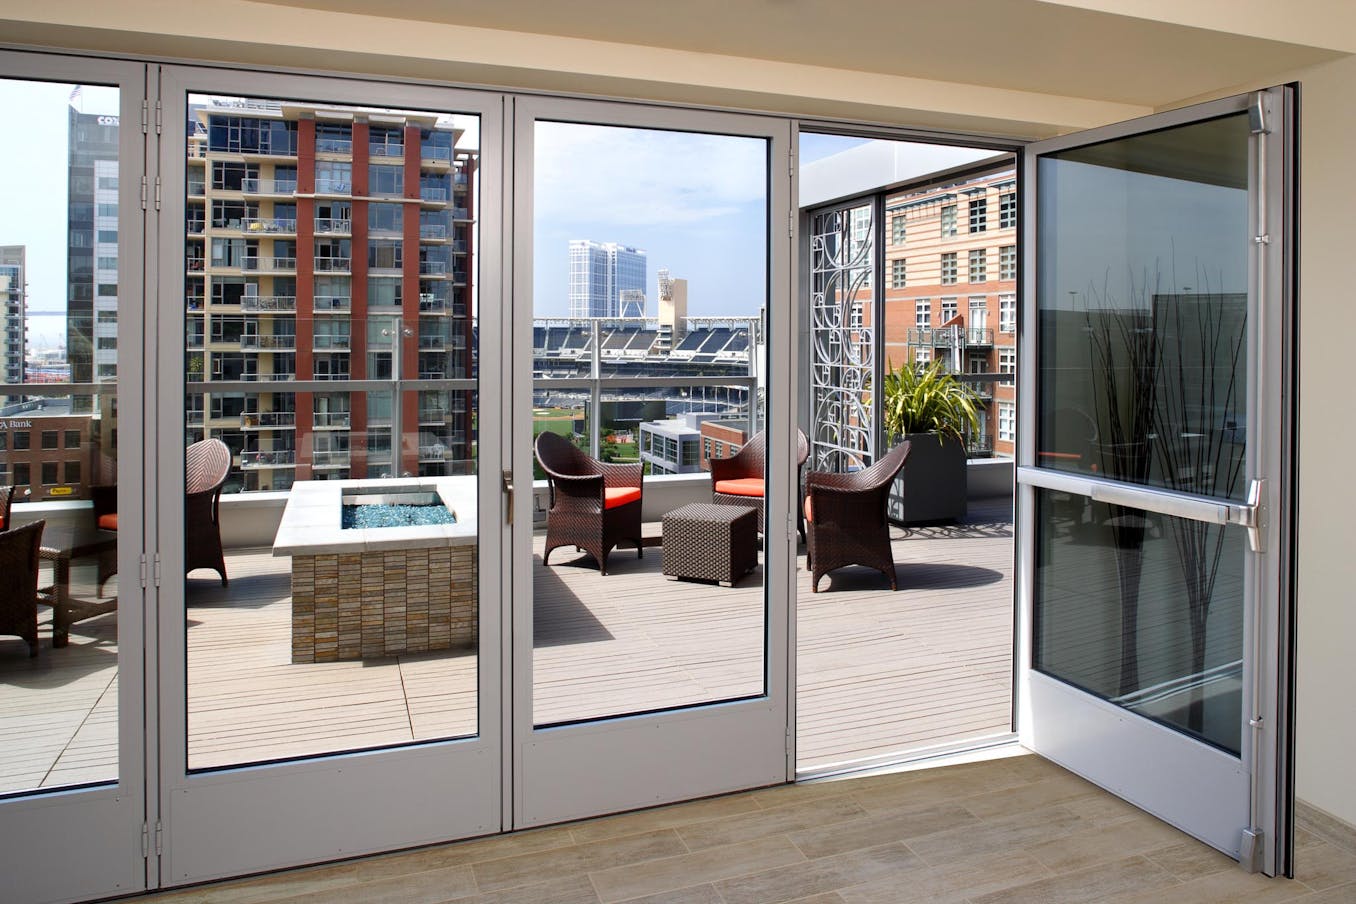 Folding glass doors with a view of a city